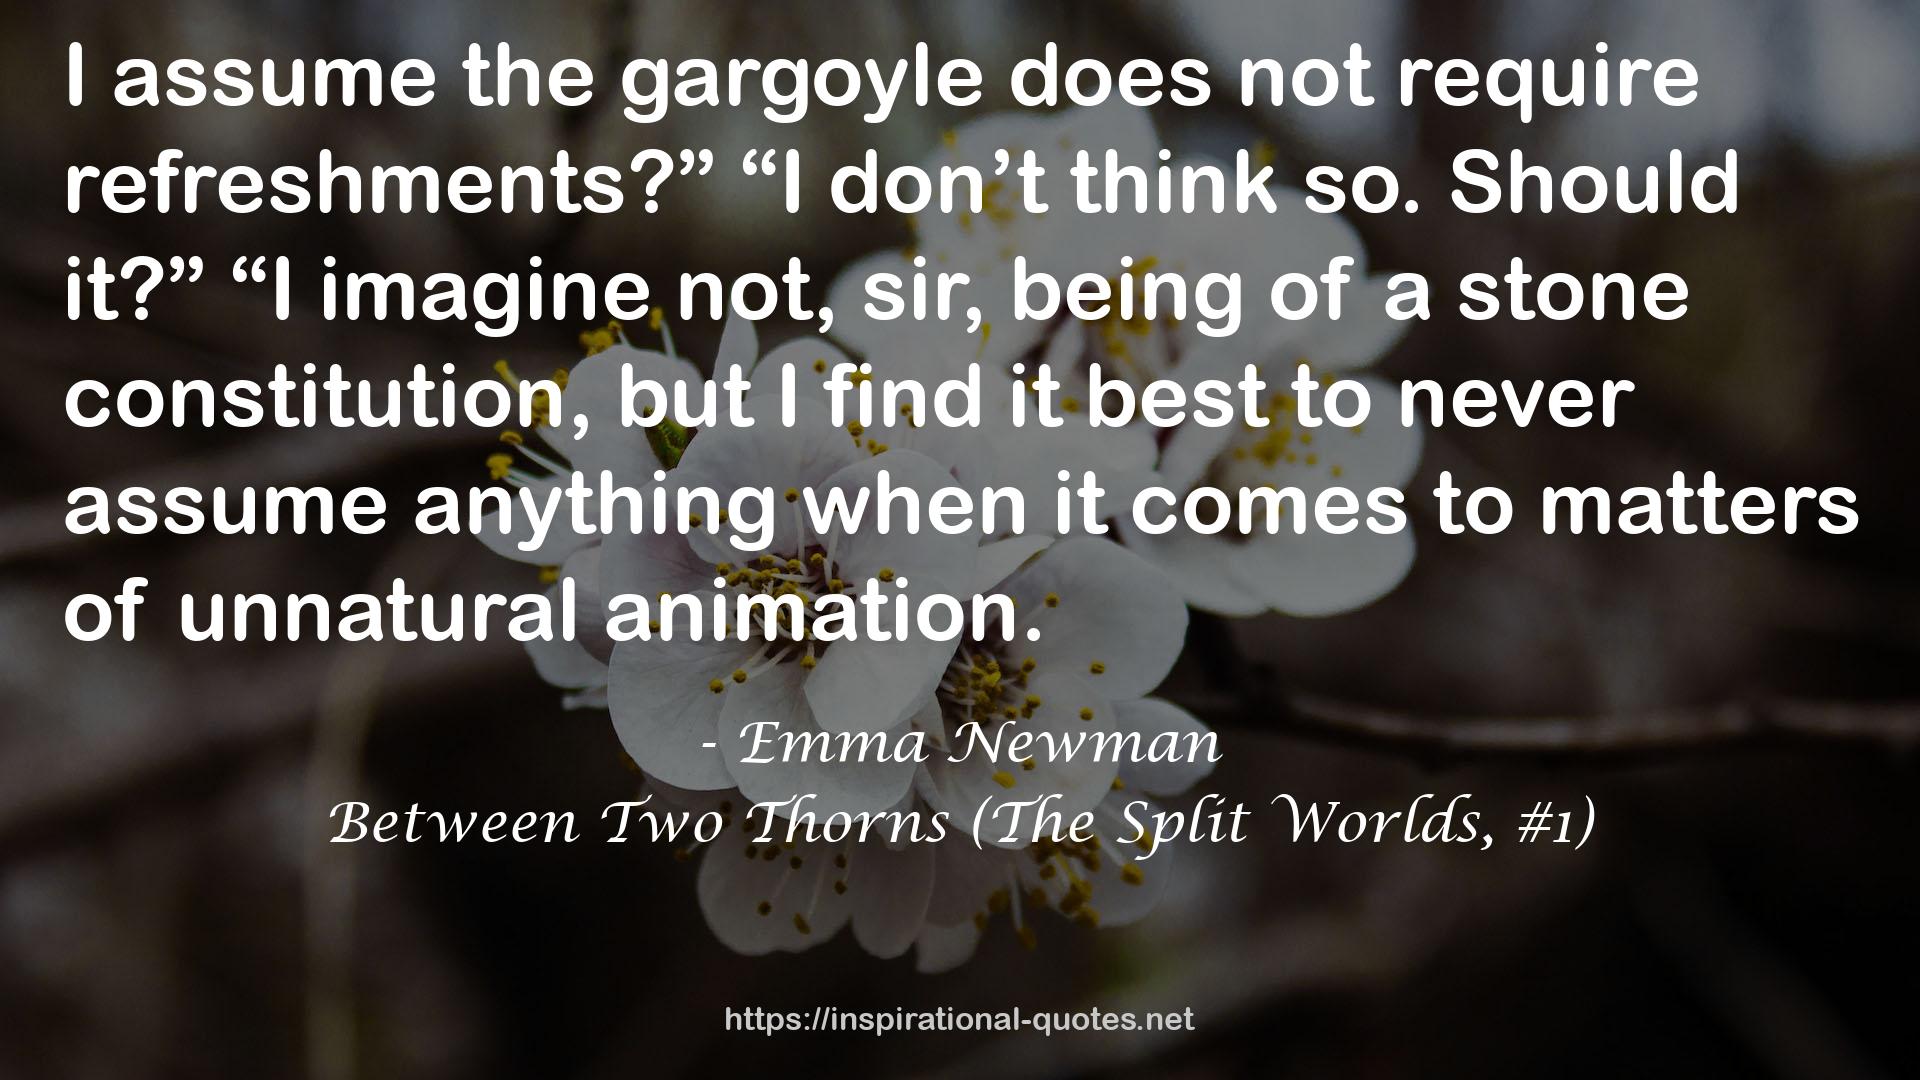 Between Two Thorns (The Split Worlds, #1) QUOTES